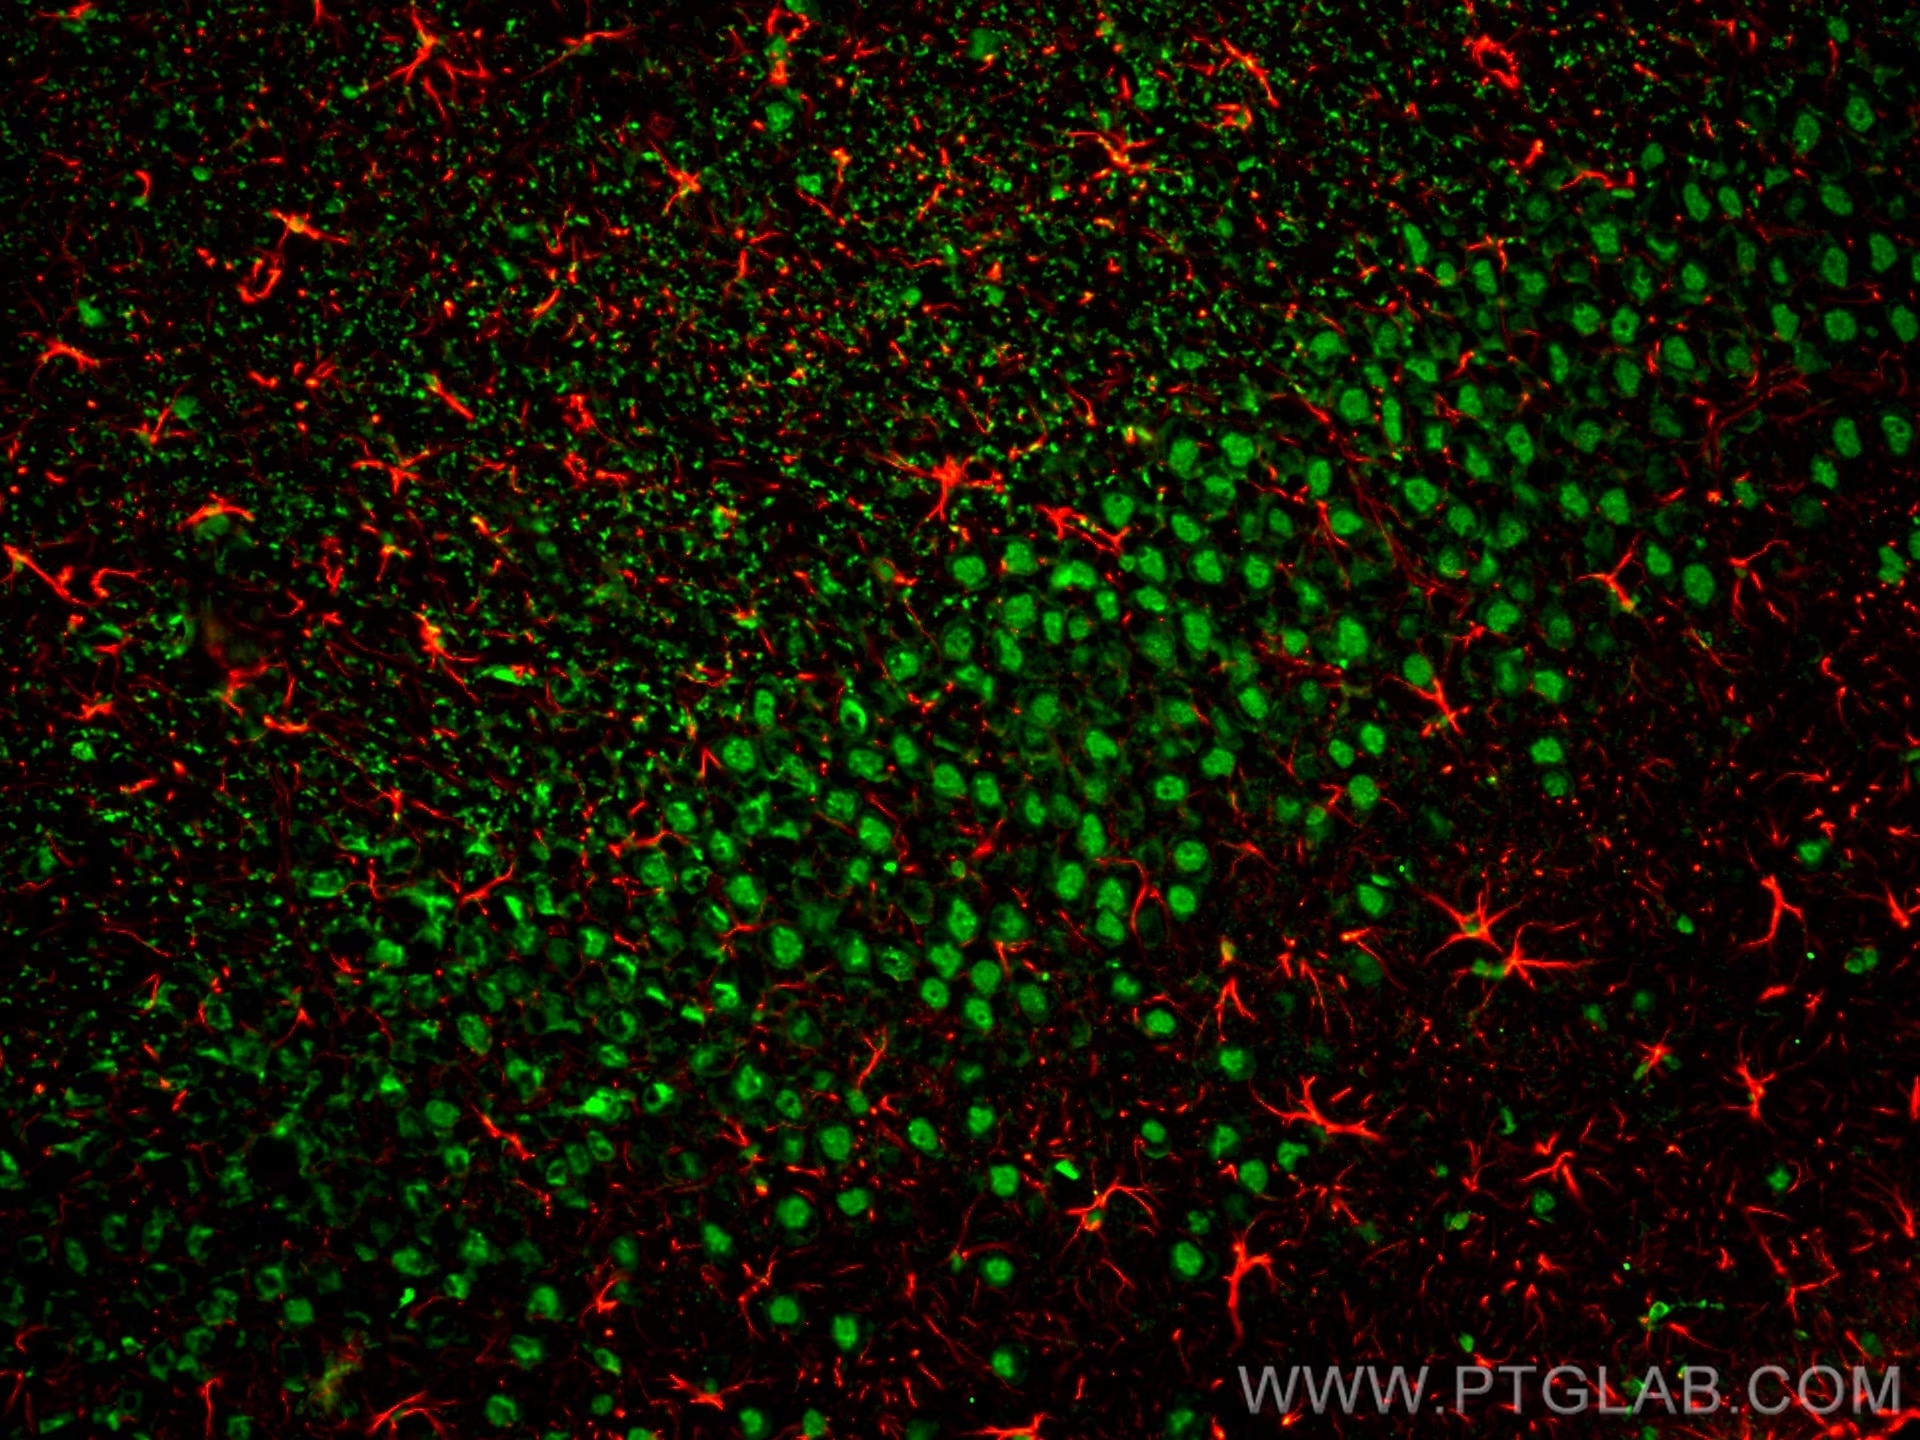 Immunofluorescence of rat brain: rat brain FFPE section was stained with Rabbit anti-GFAP polyclonal antibody (16825-1-AP, 1:200, red) and mouse anti-NeuN monoclonal antibody (66836-1-Ig, green). Multi-rAb CoraLite® Plus 594 conjugated Recombinant Goat anti-rabbit secondary antibody (RGAR004, 1:500) and Multi-rAb CoraLite® Plus 488 conjugated Goat Anti-Mouse Recombinant Secondary Antibody (H+L) were used for detection (RGAM002, 1:500) .